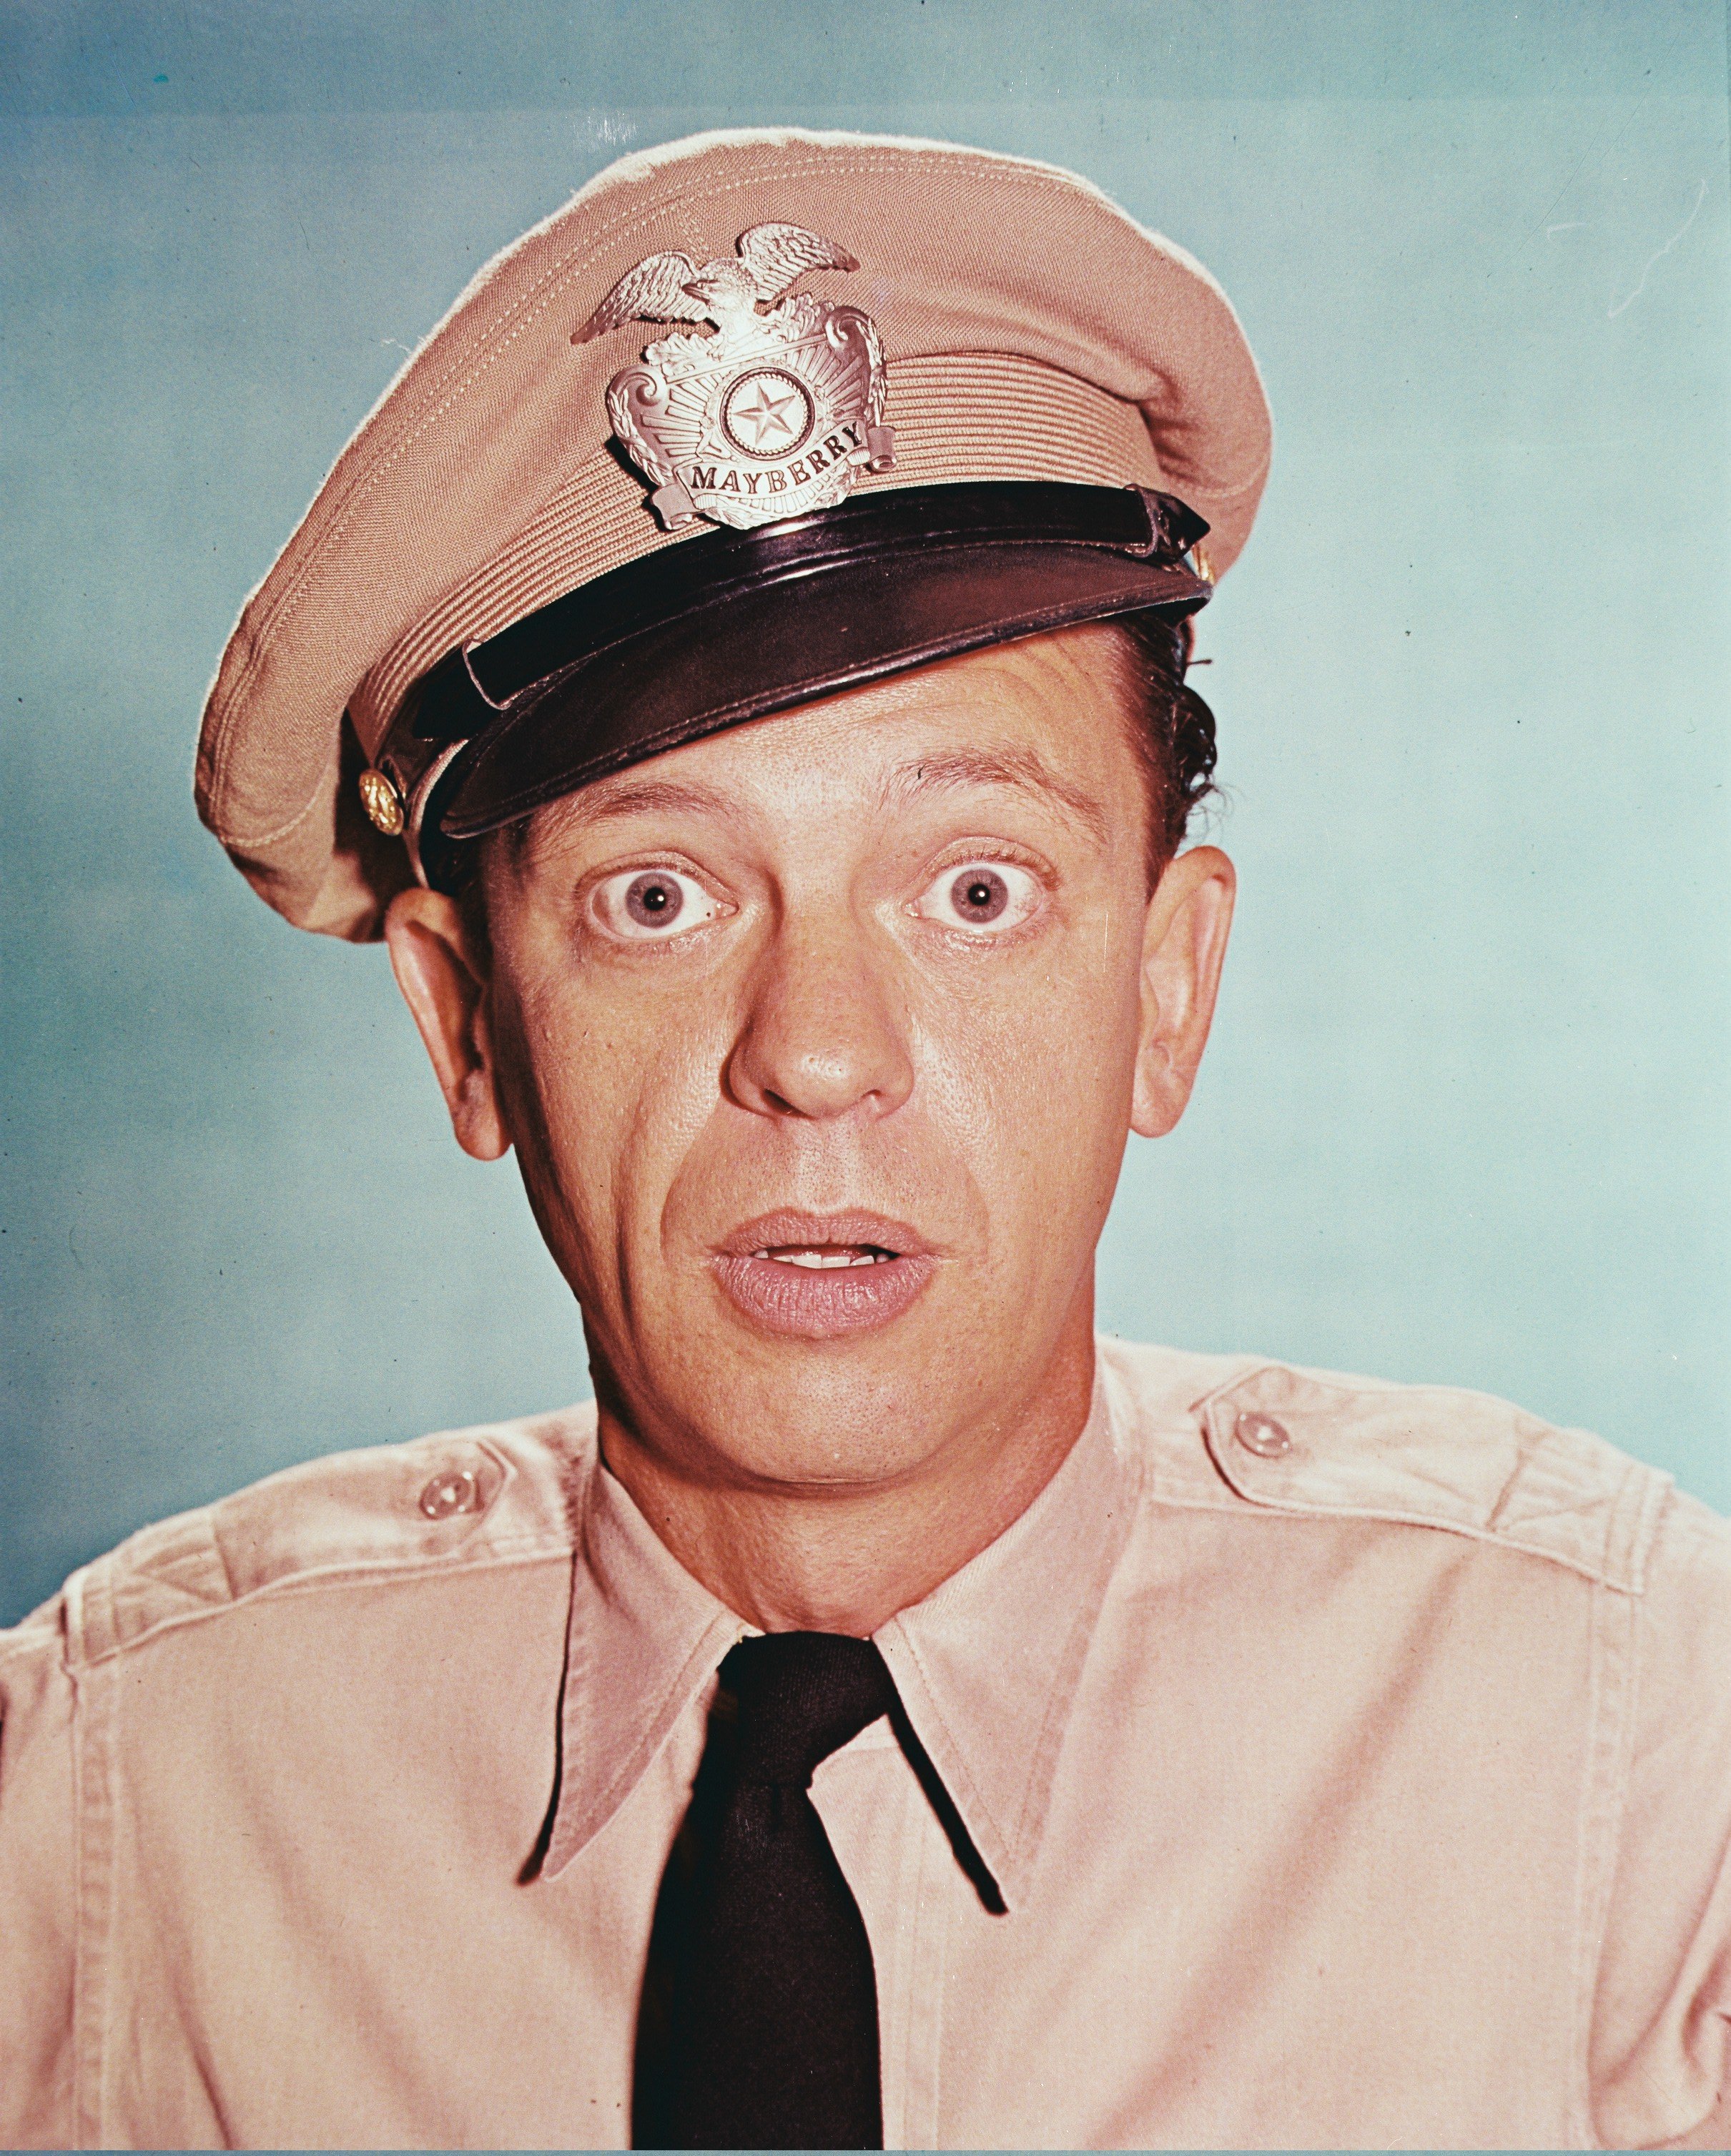 Don Knotts, US actor, in costume in a studio portrait, against a blue background, issued as publicity for the television series. | Source: Getty Images